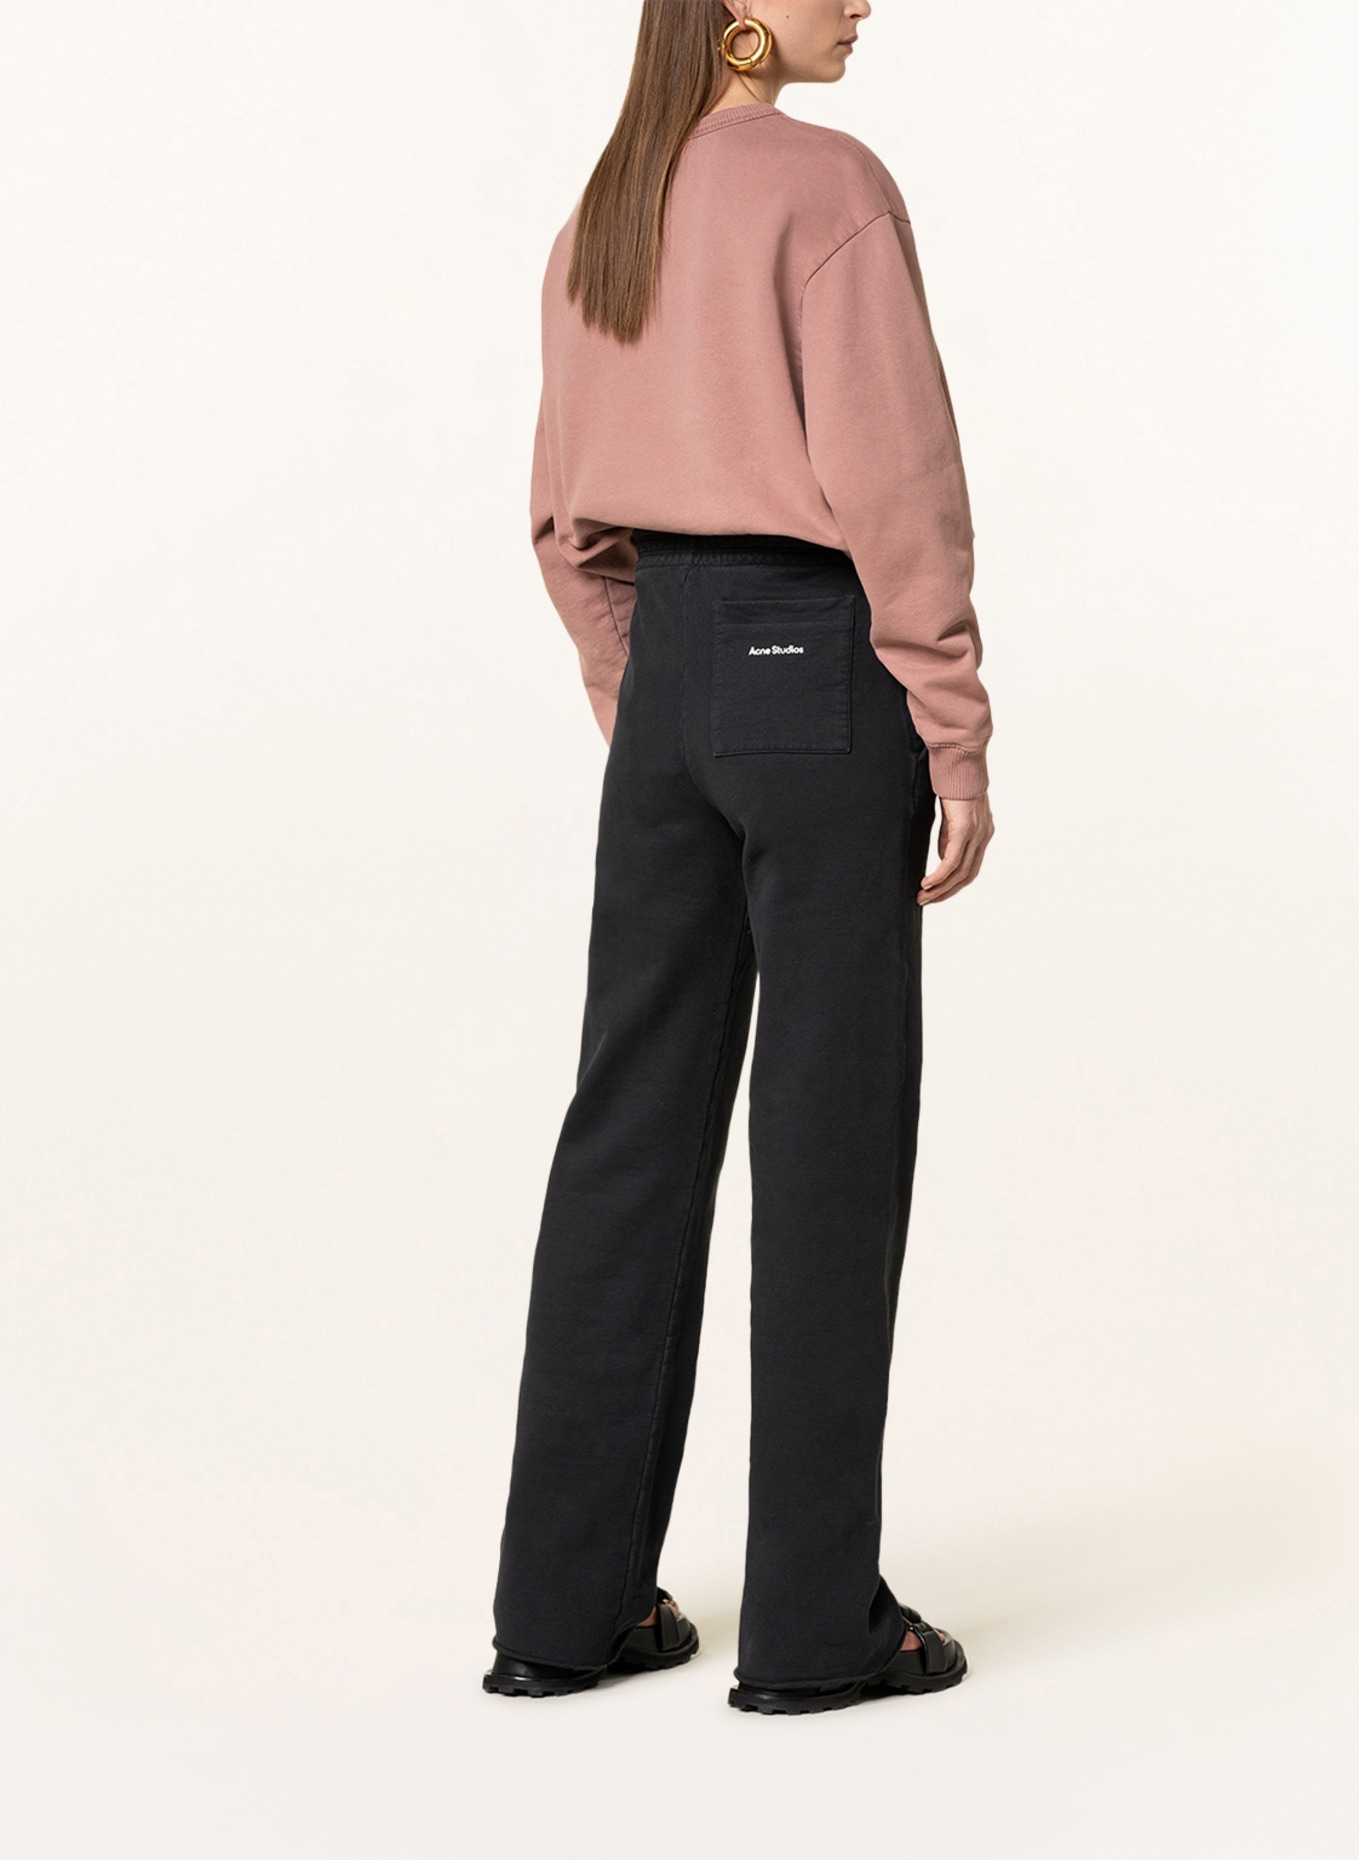 Acne Studios Pants in jogger style, Color: BLACK (Image 3)